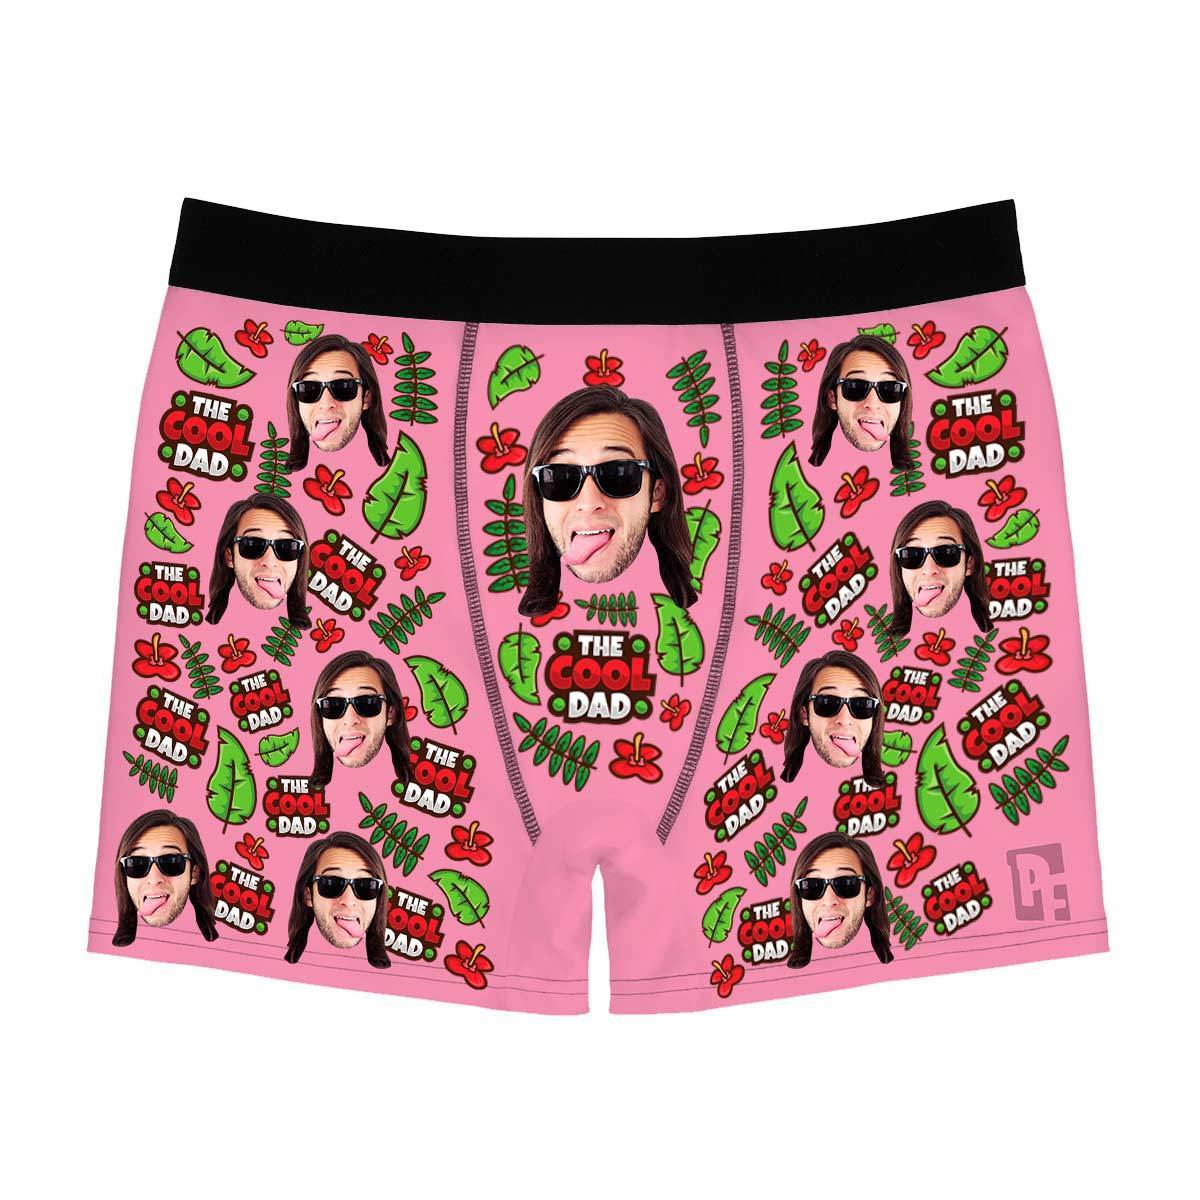 Pink The cool dad men's boxer briefs personalized with photo printed on them